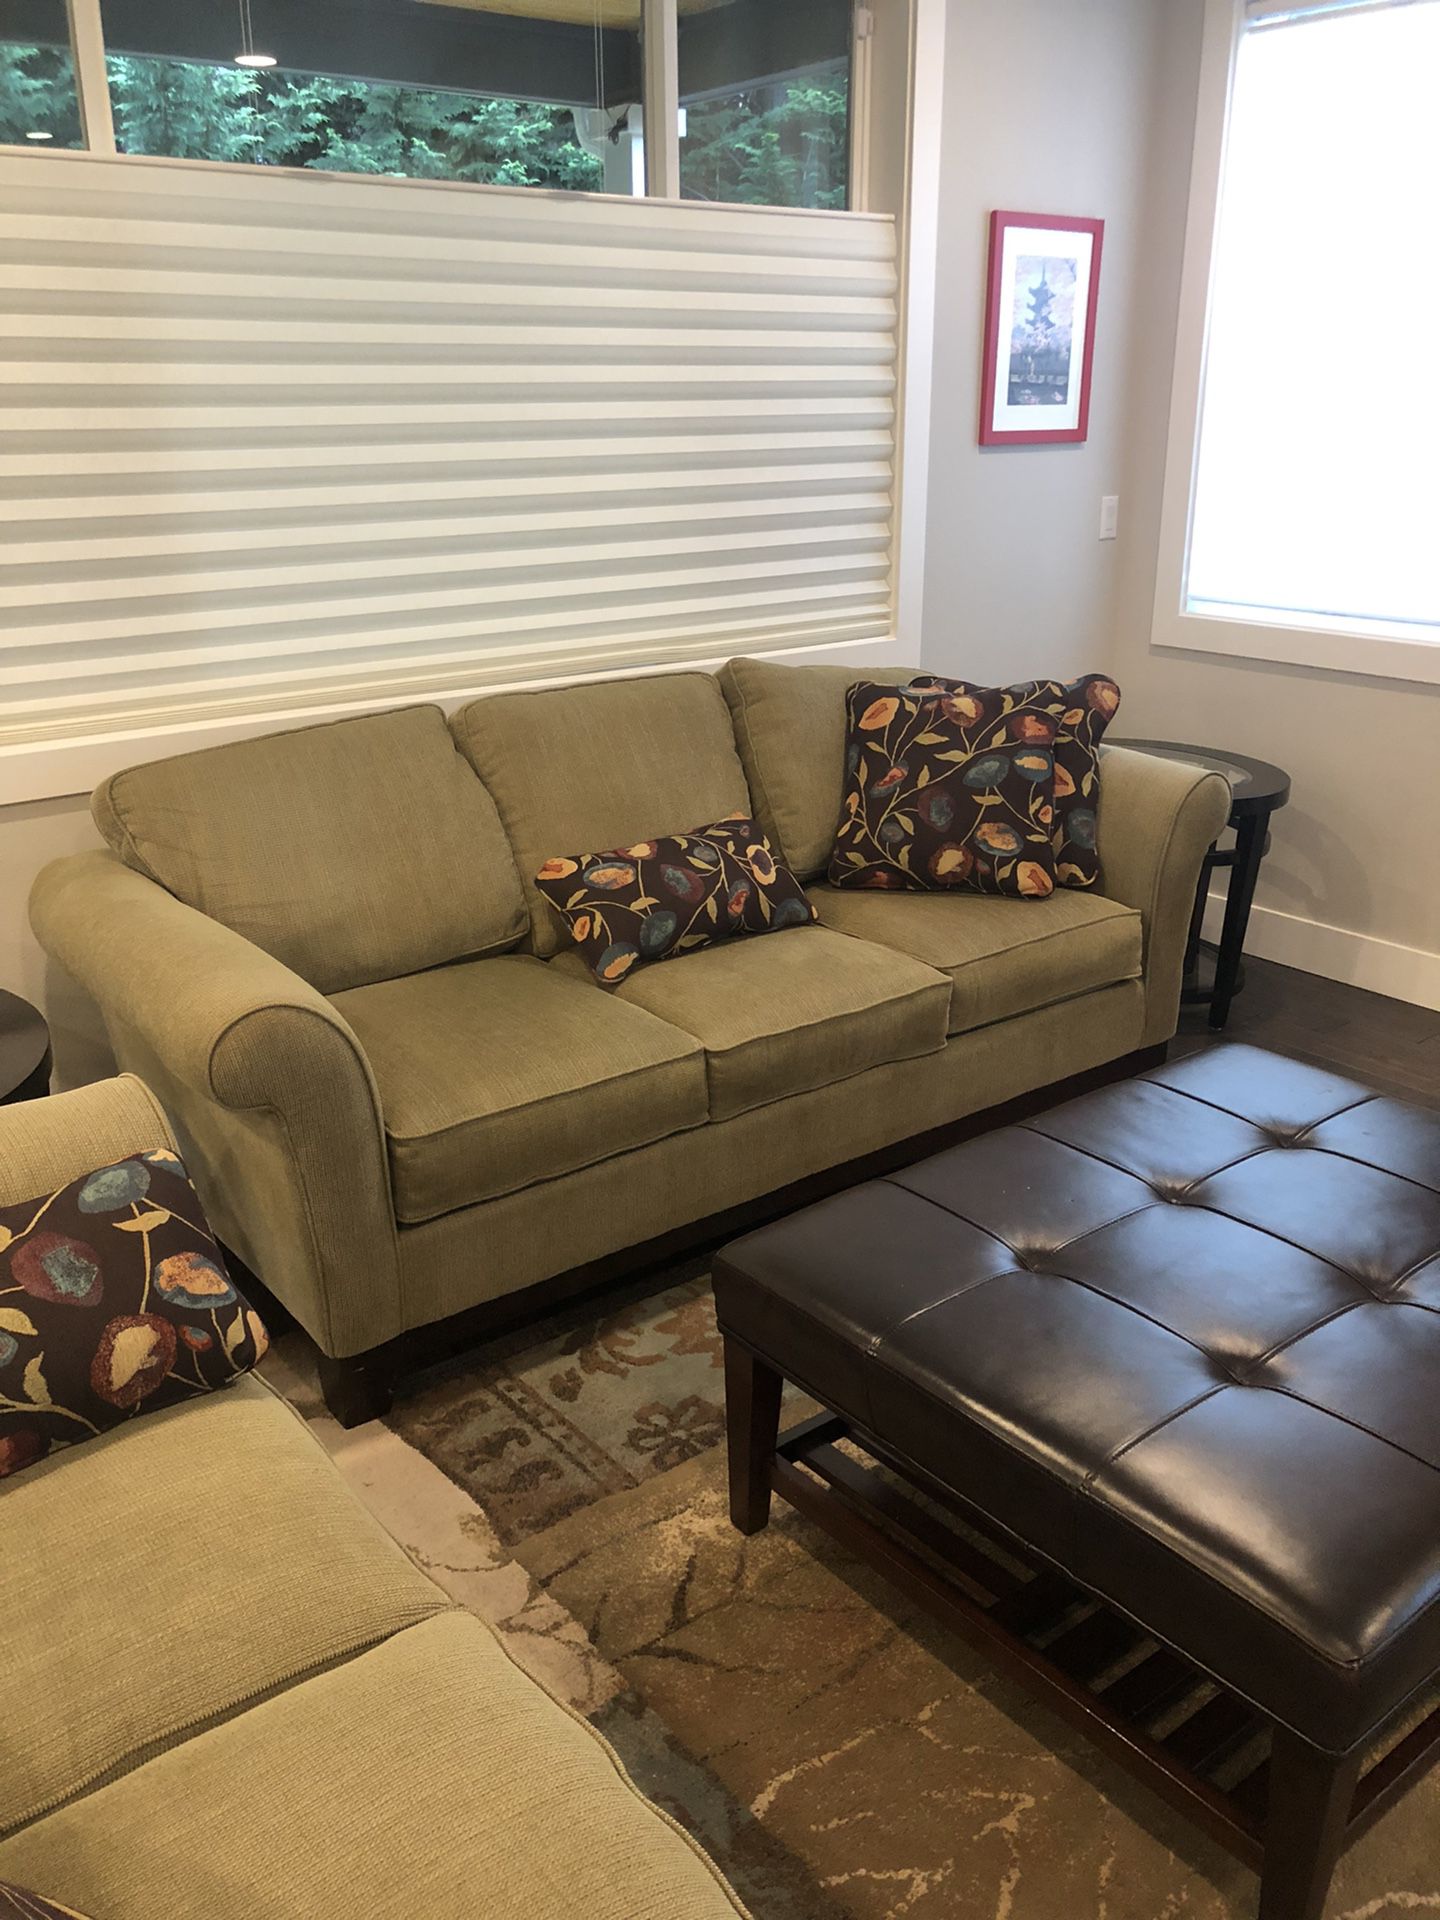 LazyBoy Couch, Loveseat, Chair, Ottoman